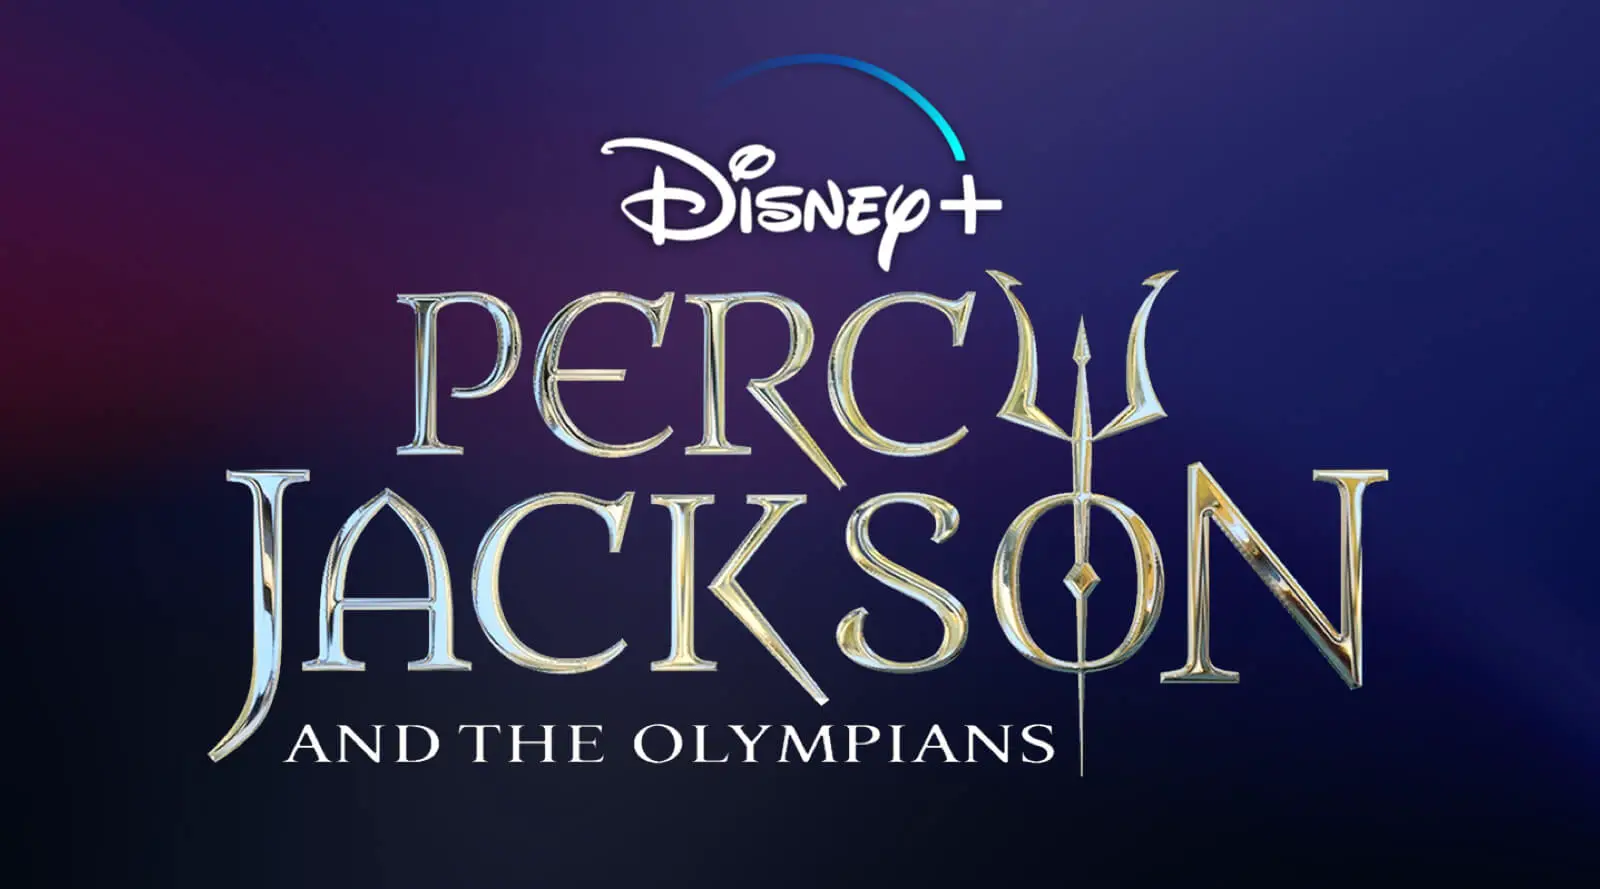 Percy-Jackson-and-the-Olympians